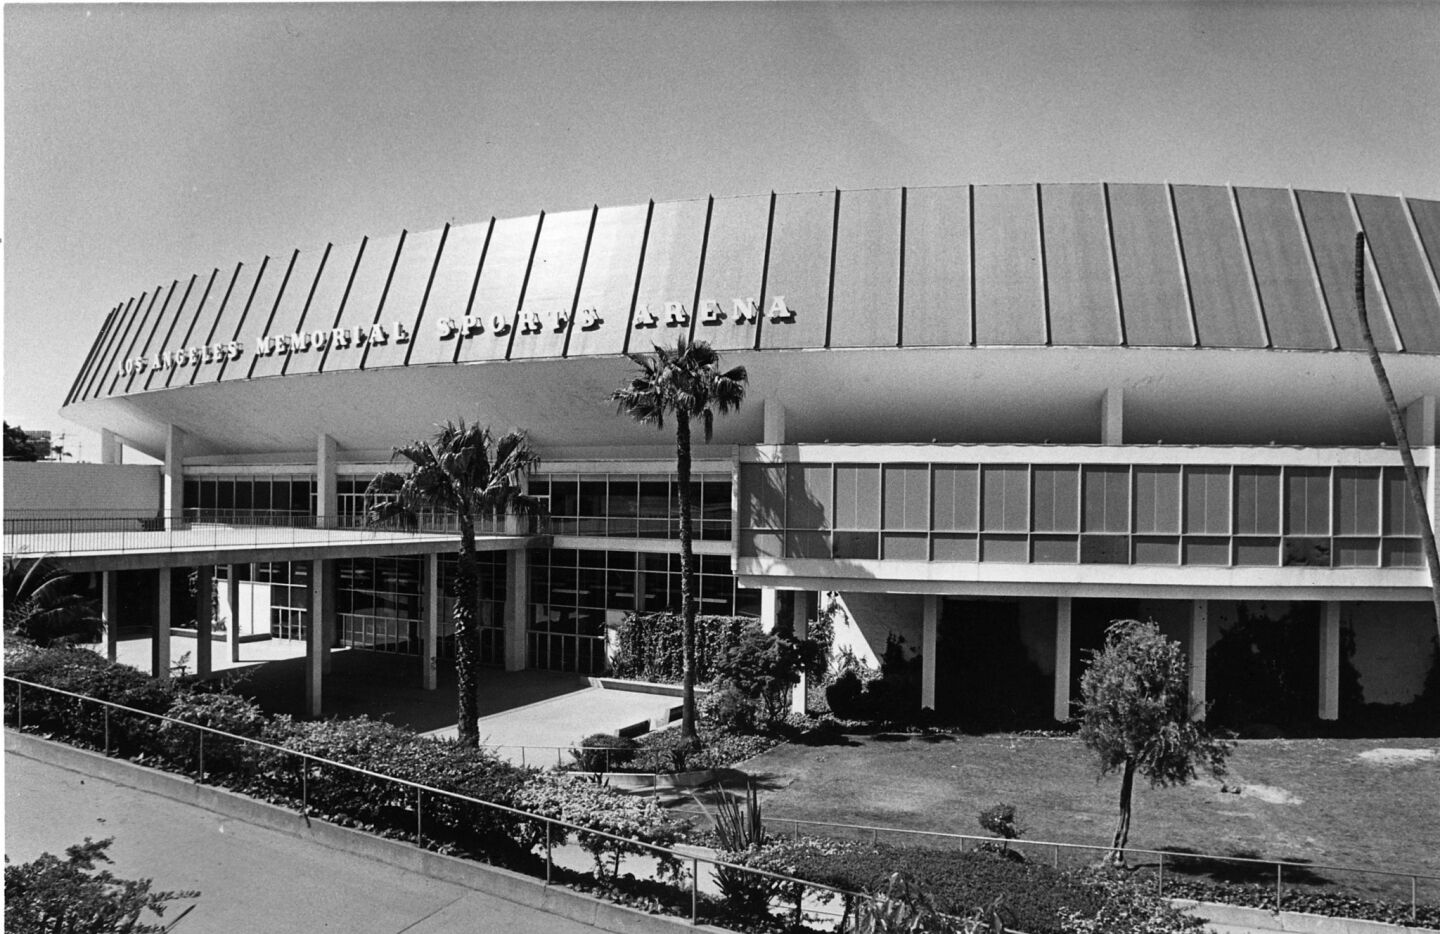 The Los Angeles Memorial Sports Arena as seen on April 16, 1987.